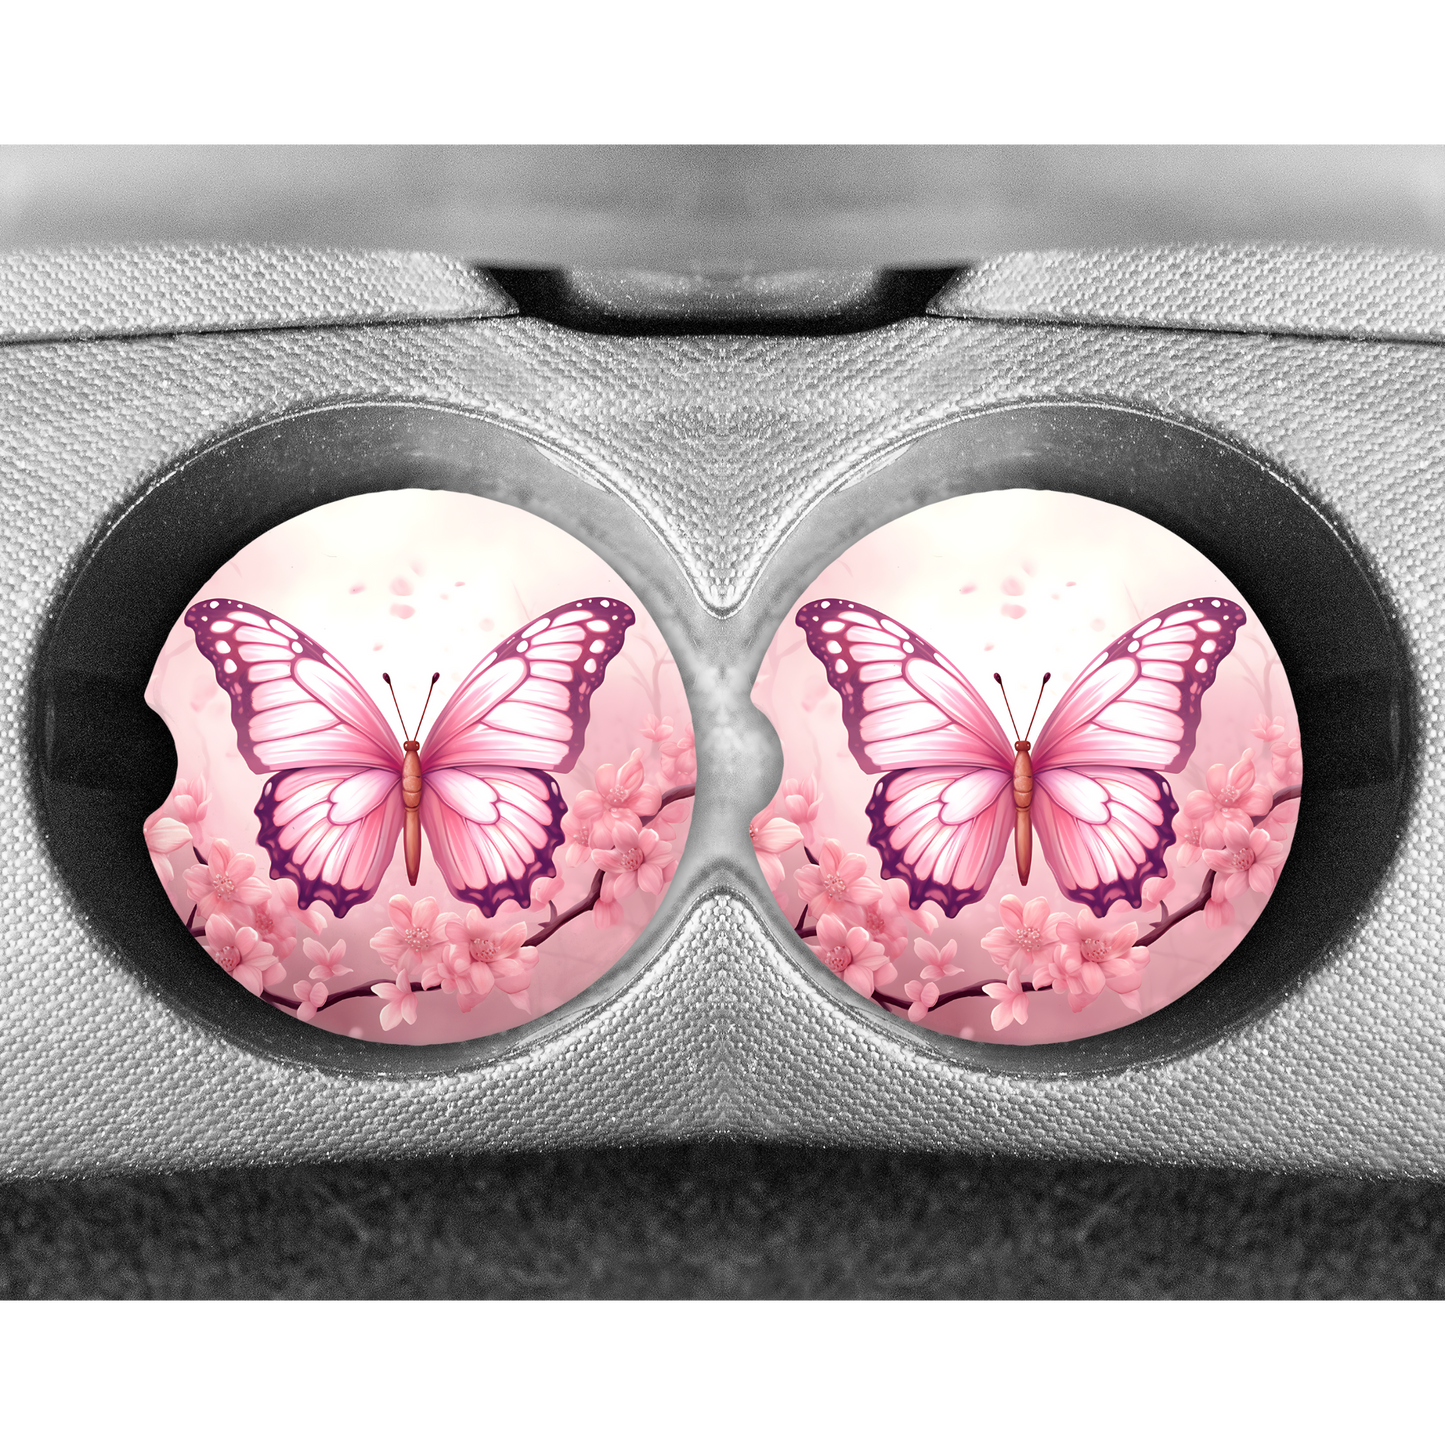 Premium Neoprene Car Coasters | Drink Holders for Your Car Console - Set of 2 Pink Butterfly Design